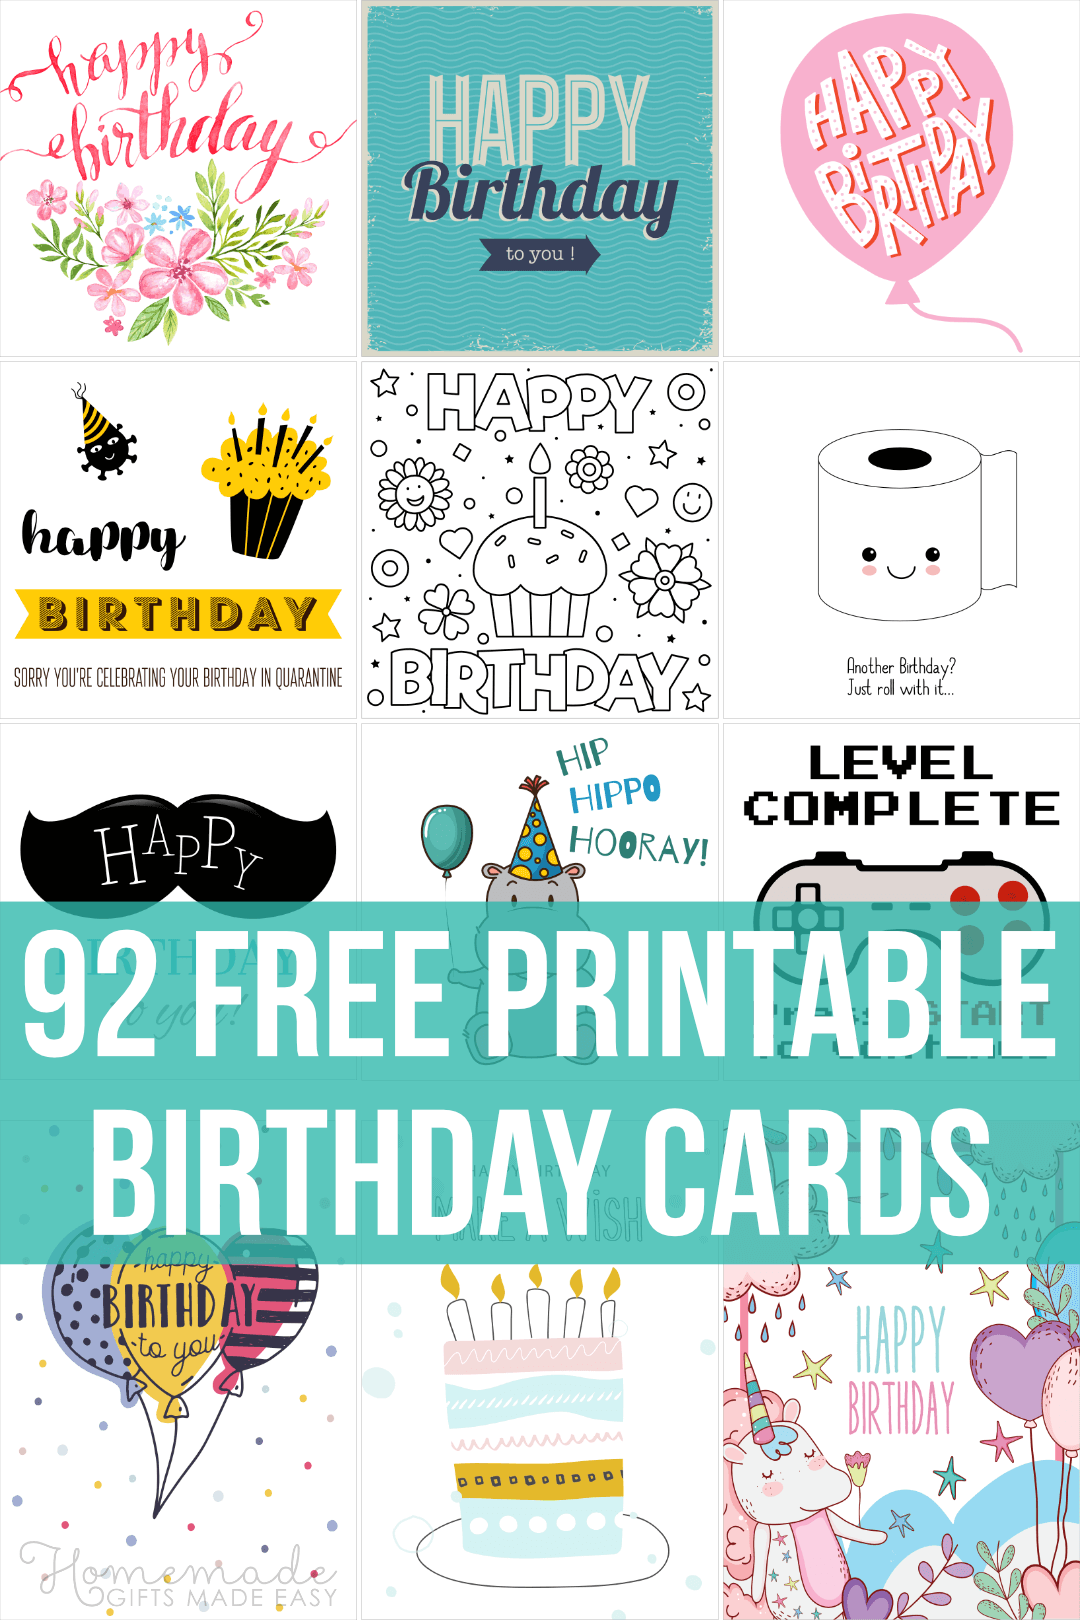 21 Free Printable Birthday Cards For Him, Her, Kids and Adults Intended For Birthday Card Collage Template